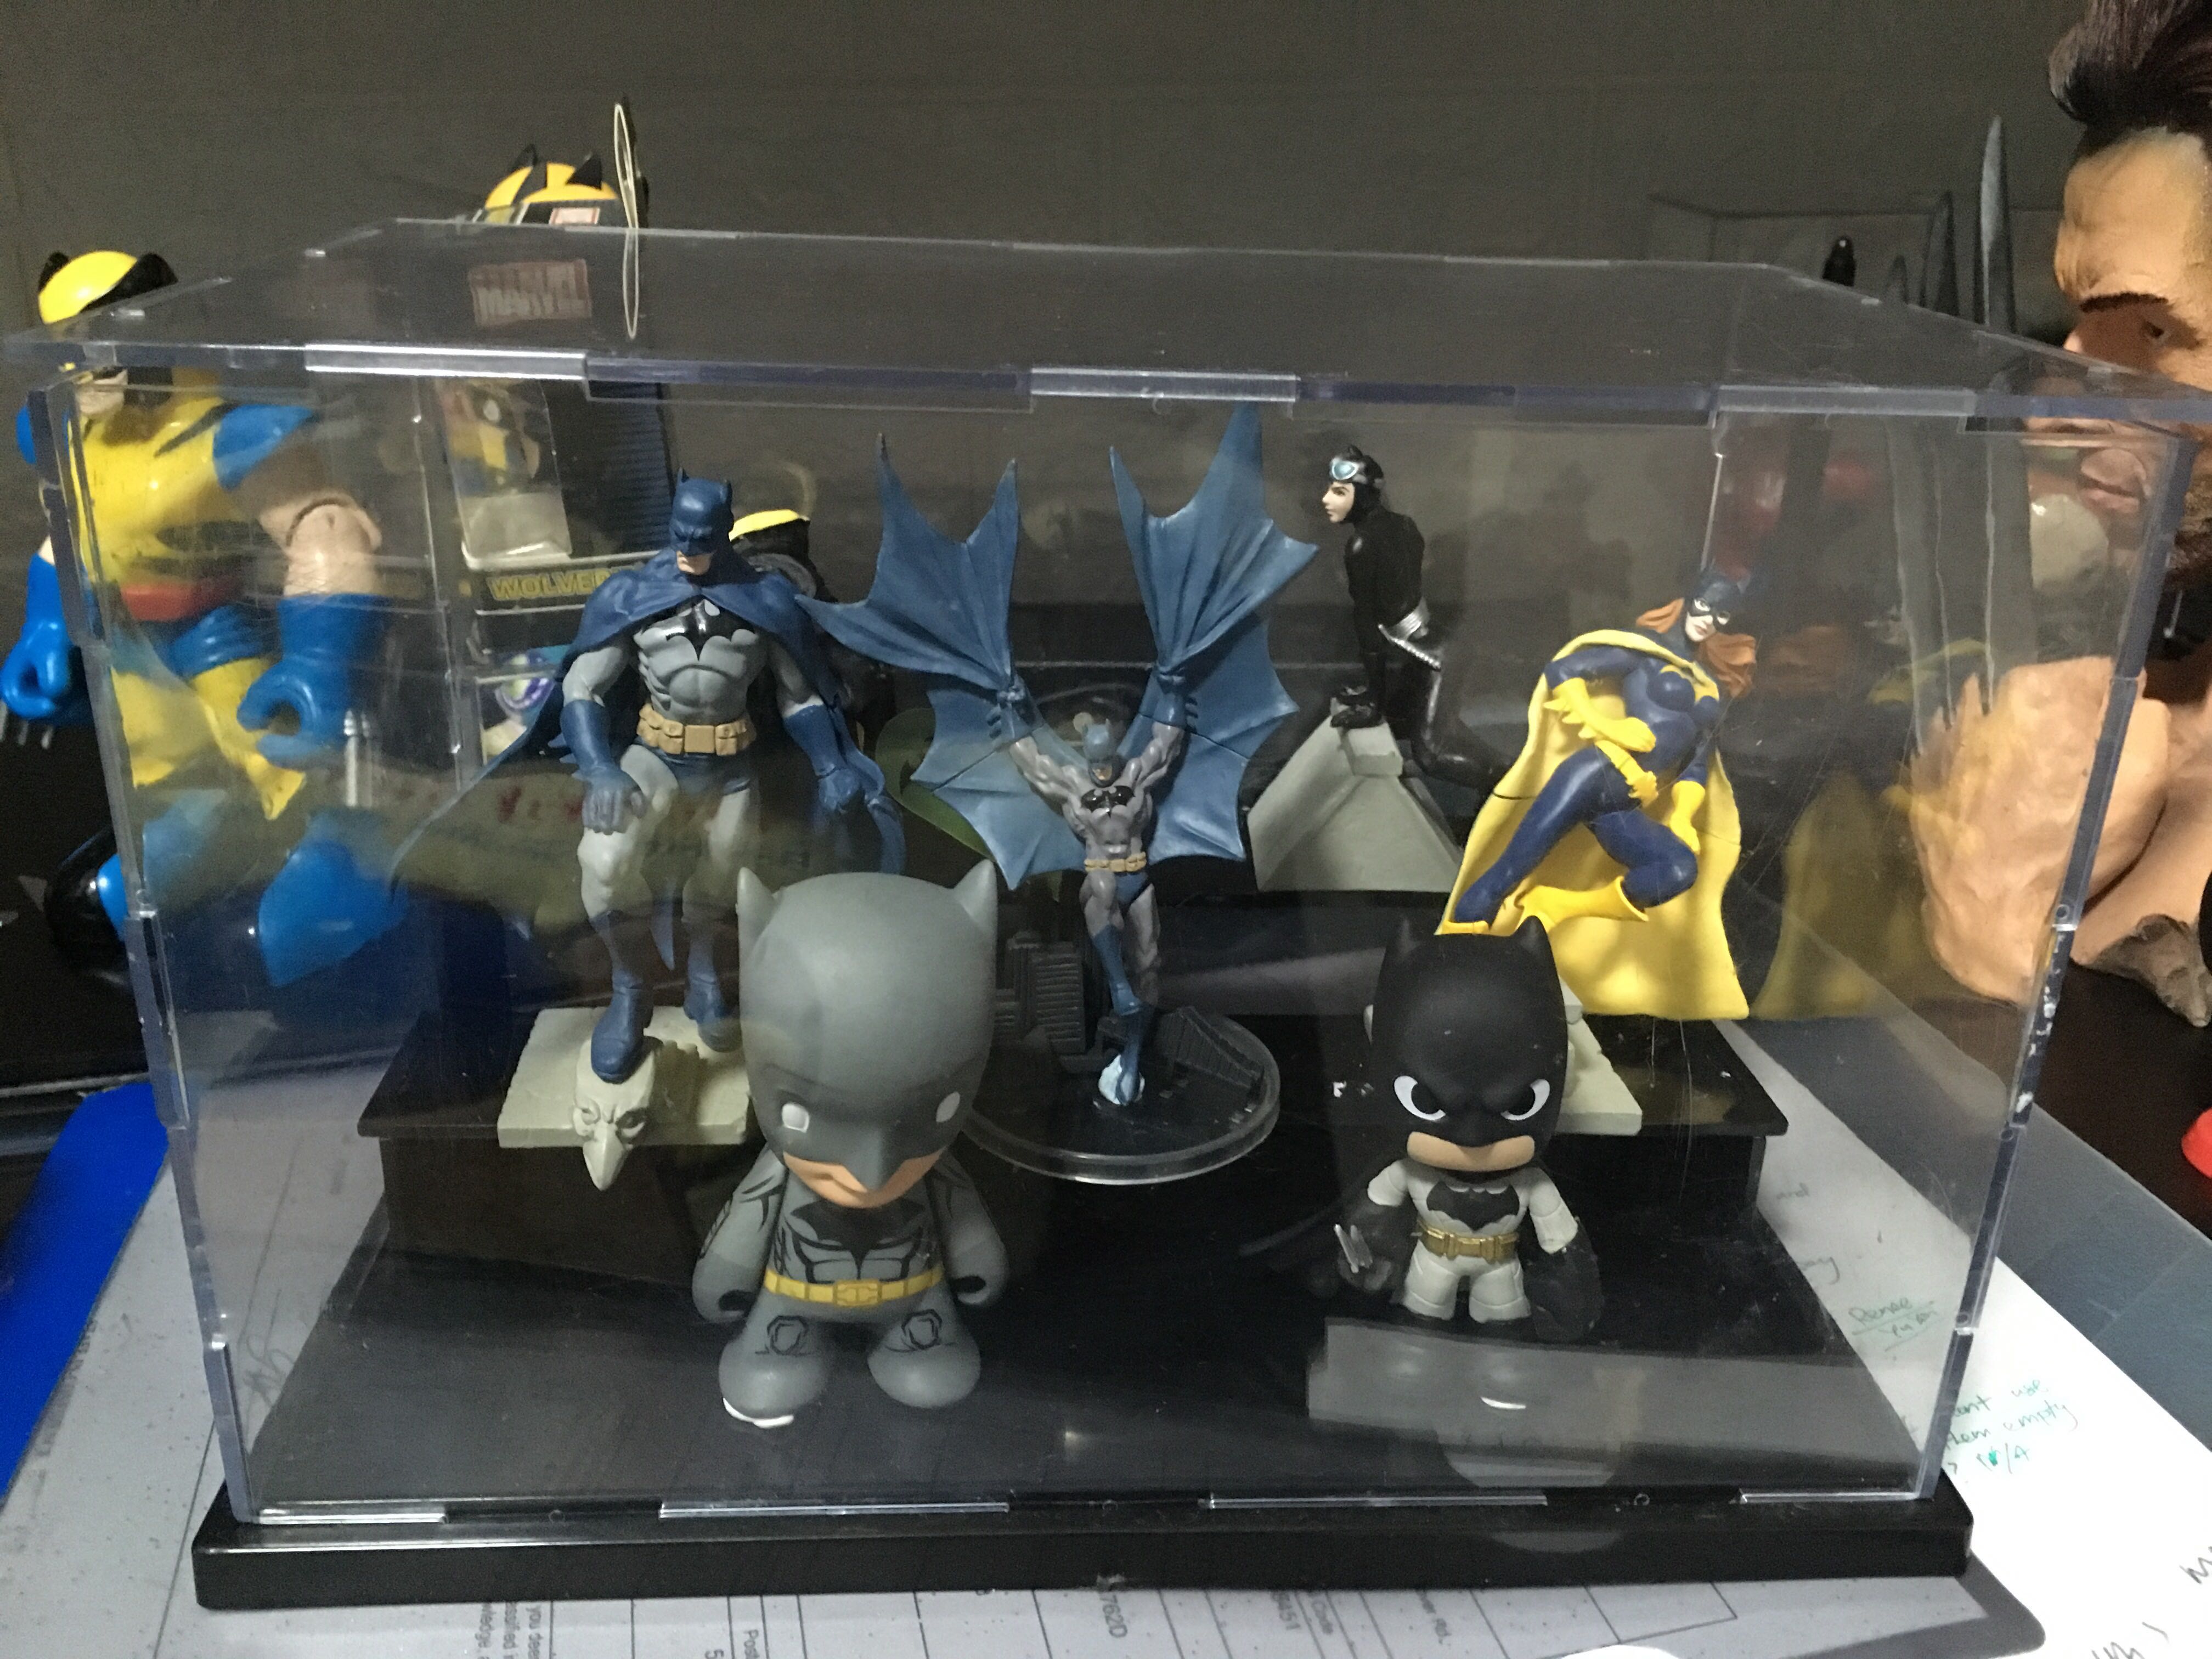 Batman gashapon with display case, Hobbies & Toys, Toys & Games on Carousell